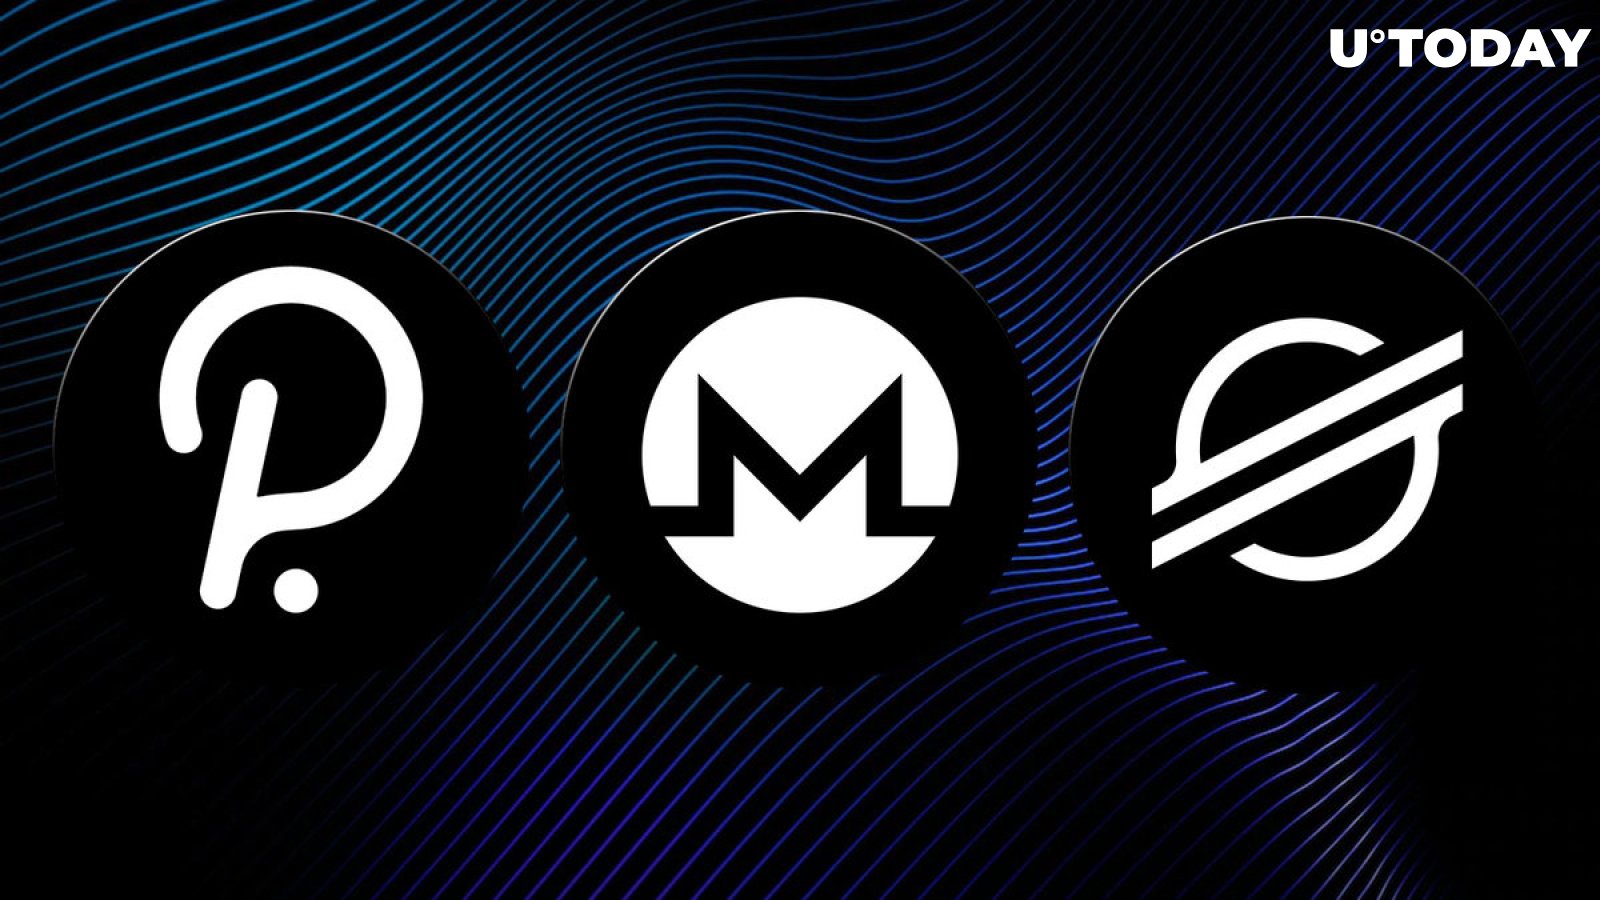 DOT, XMR, XLM Might Be Potential Candidates for Price Increases, Here's Why